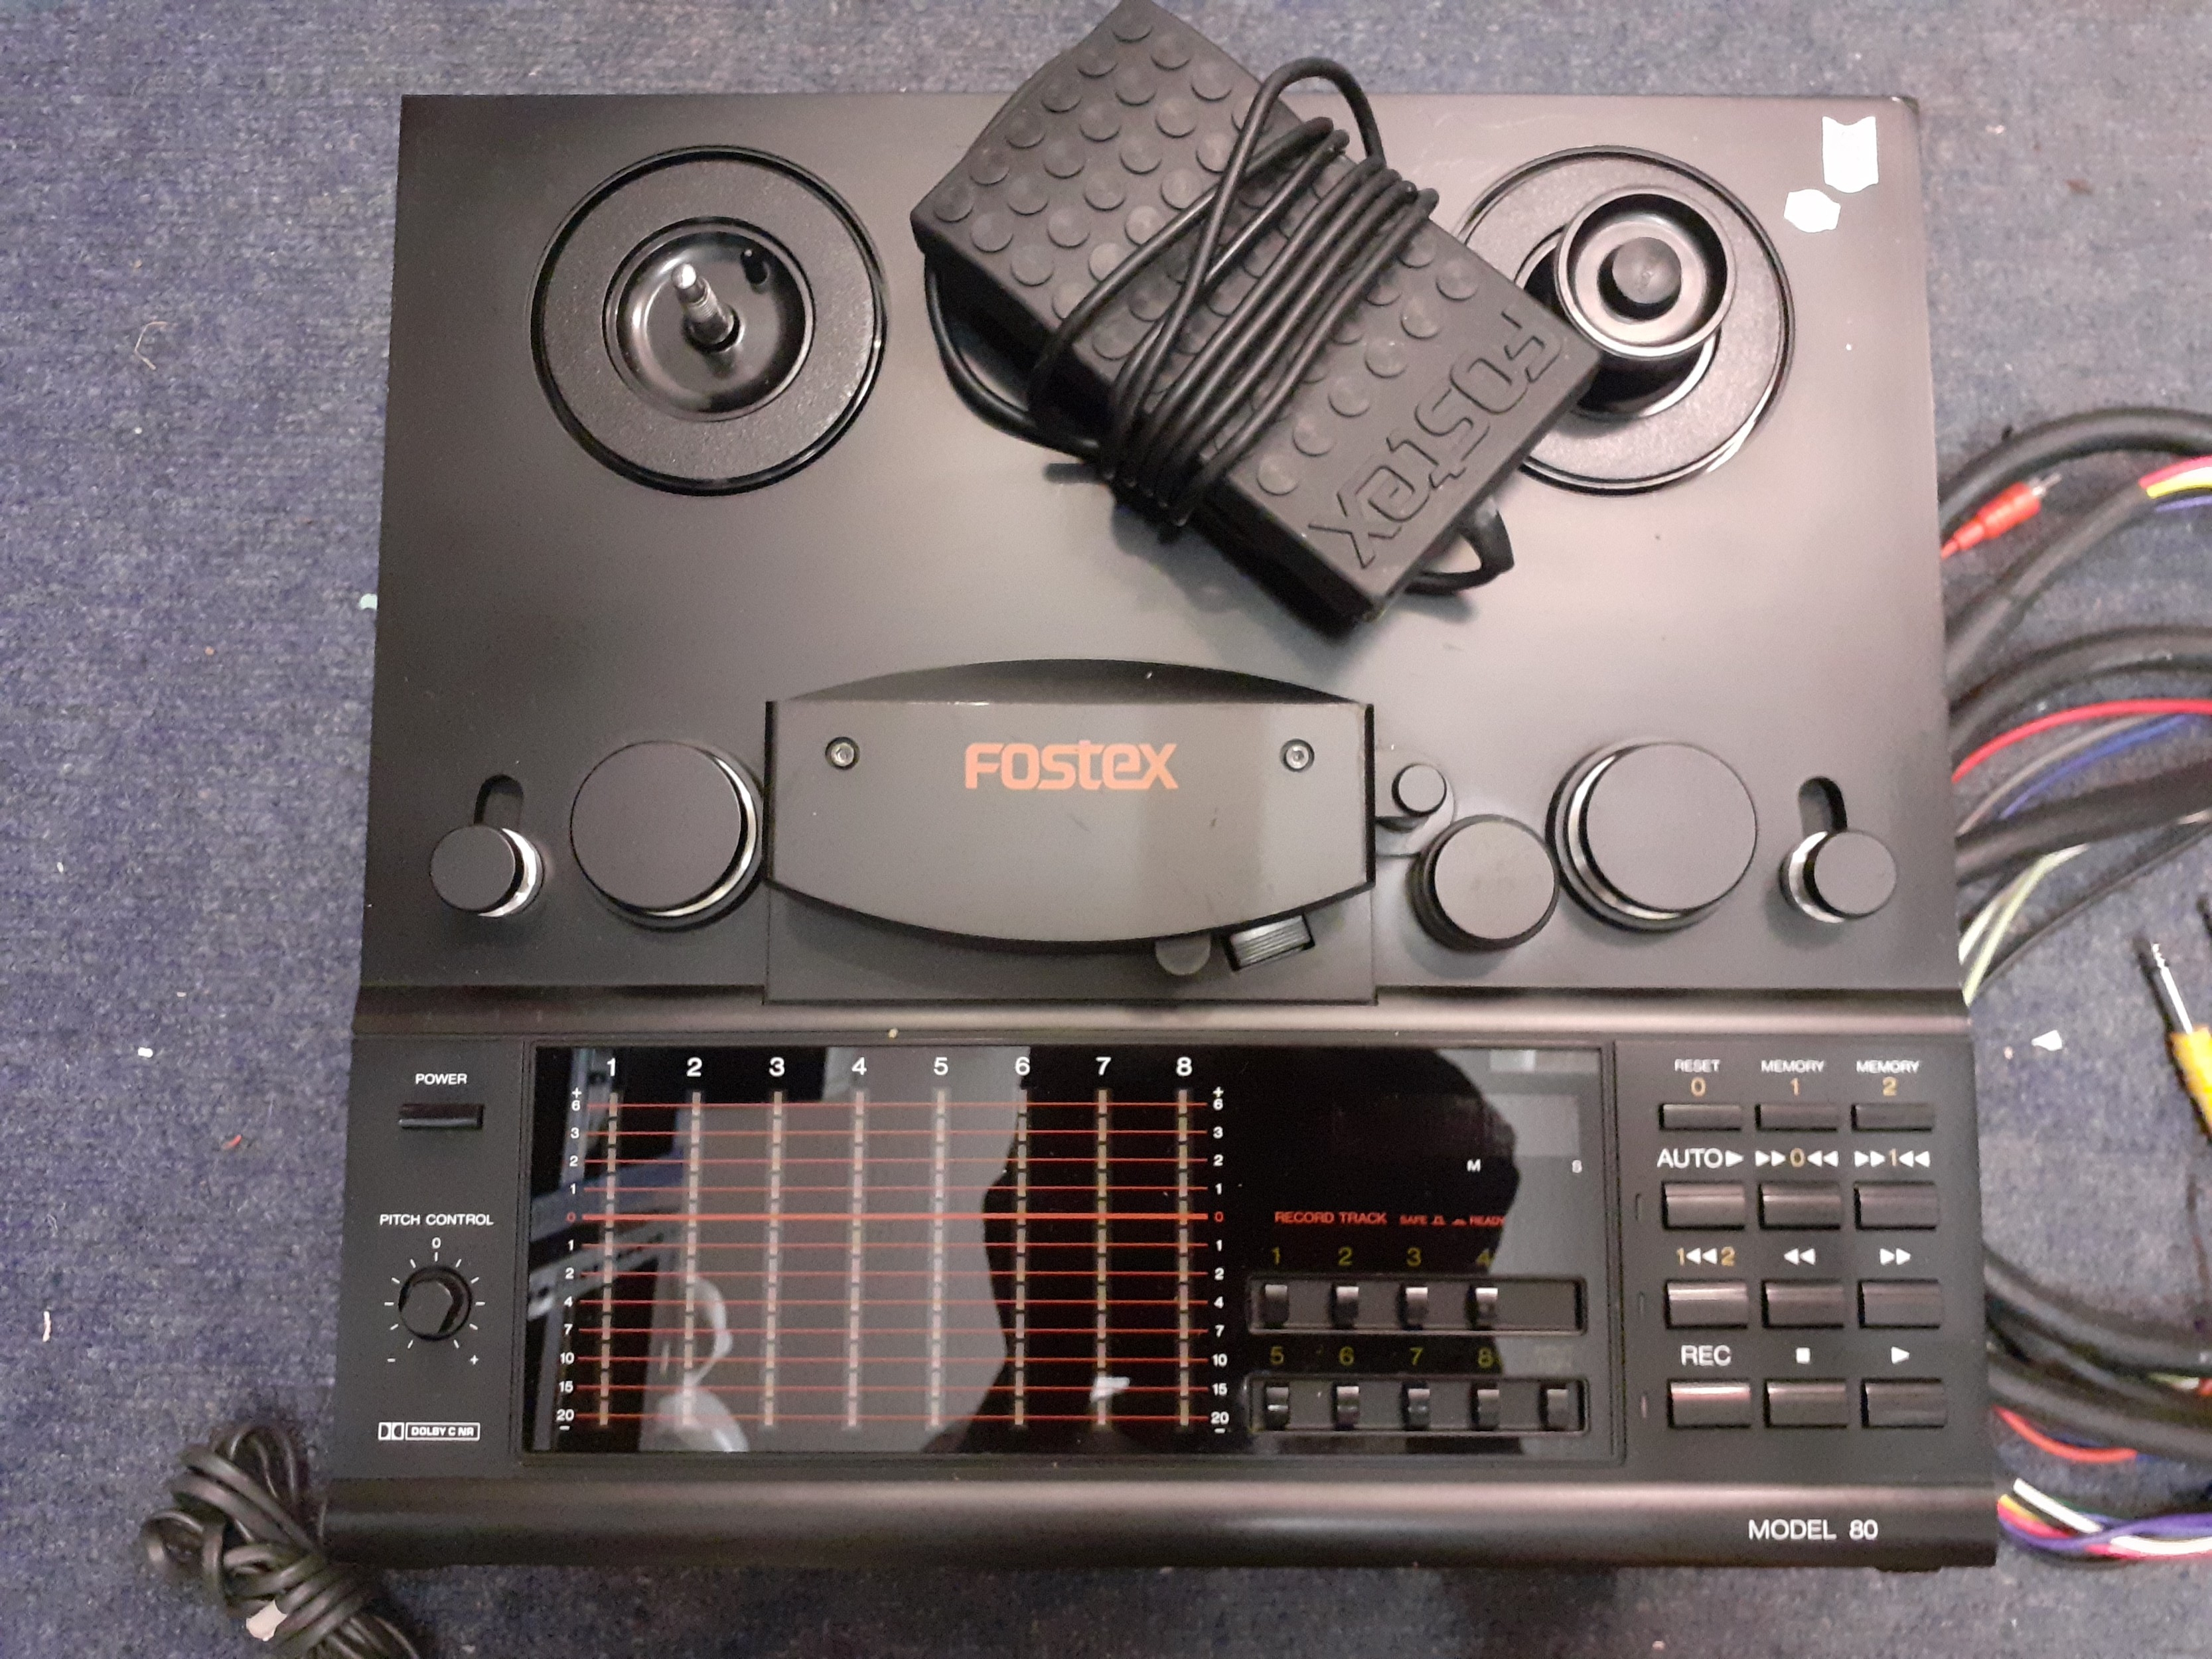 A Fostex Model 80 reel to reel tape recorder. Location:1-5